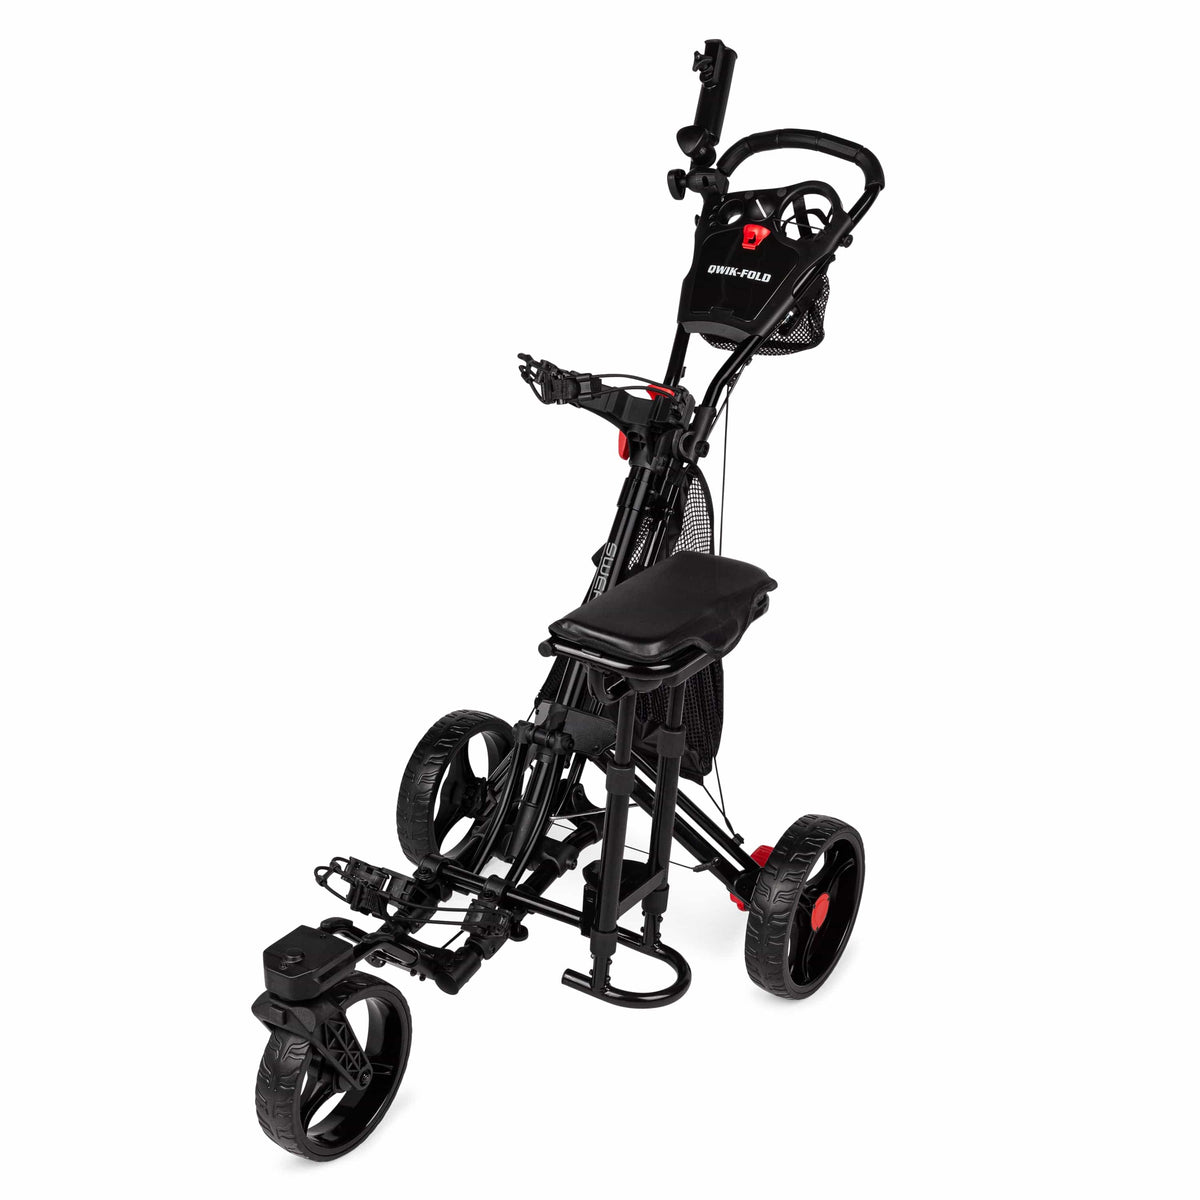 Founders Club Swerve 360 Swivel Wheel Qwik Fold Golf Push Cart with Deluxe Seat (pick color)